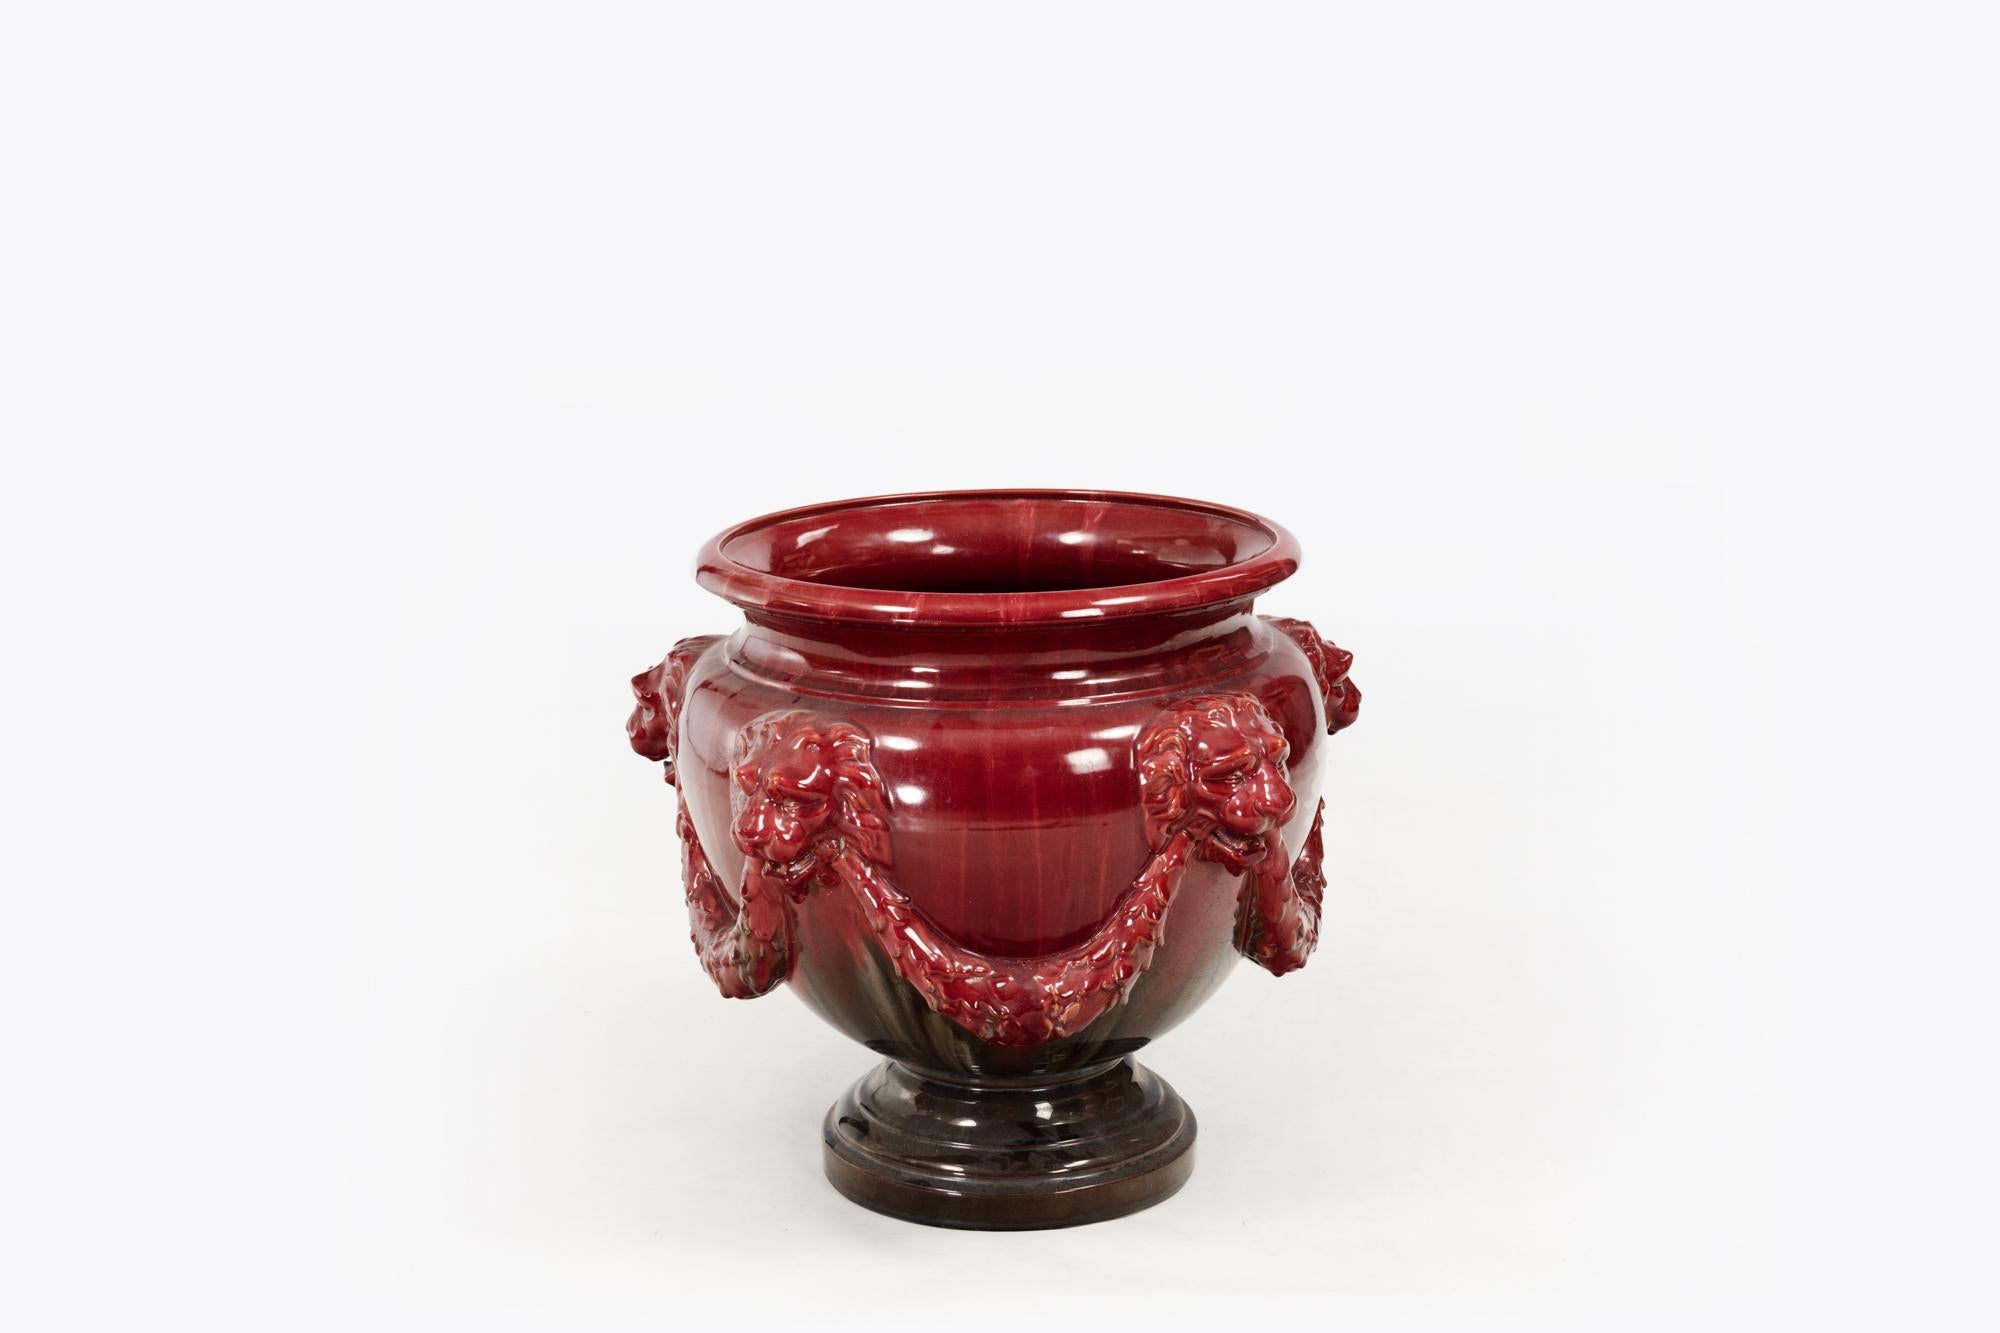 19th Century Jardiniere with lion head masks and garland detailing decorated with blended rich red majolica glaze.